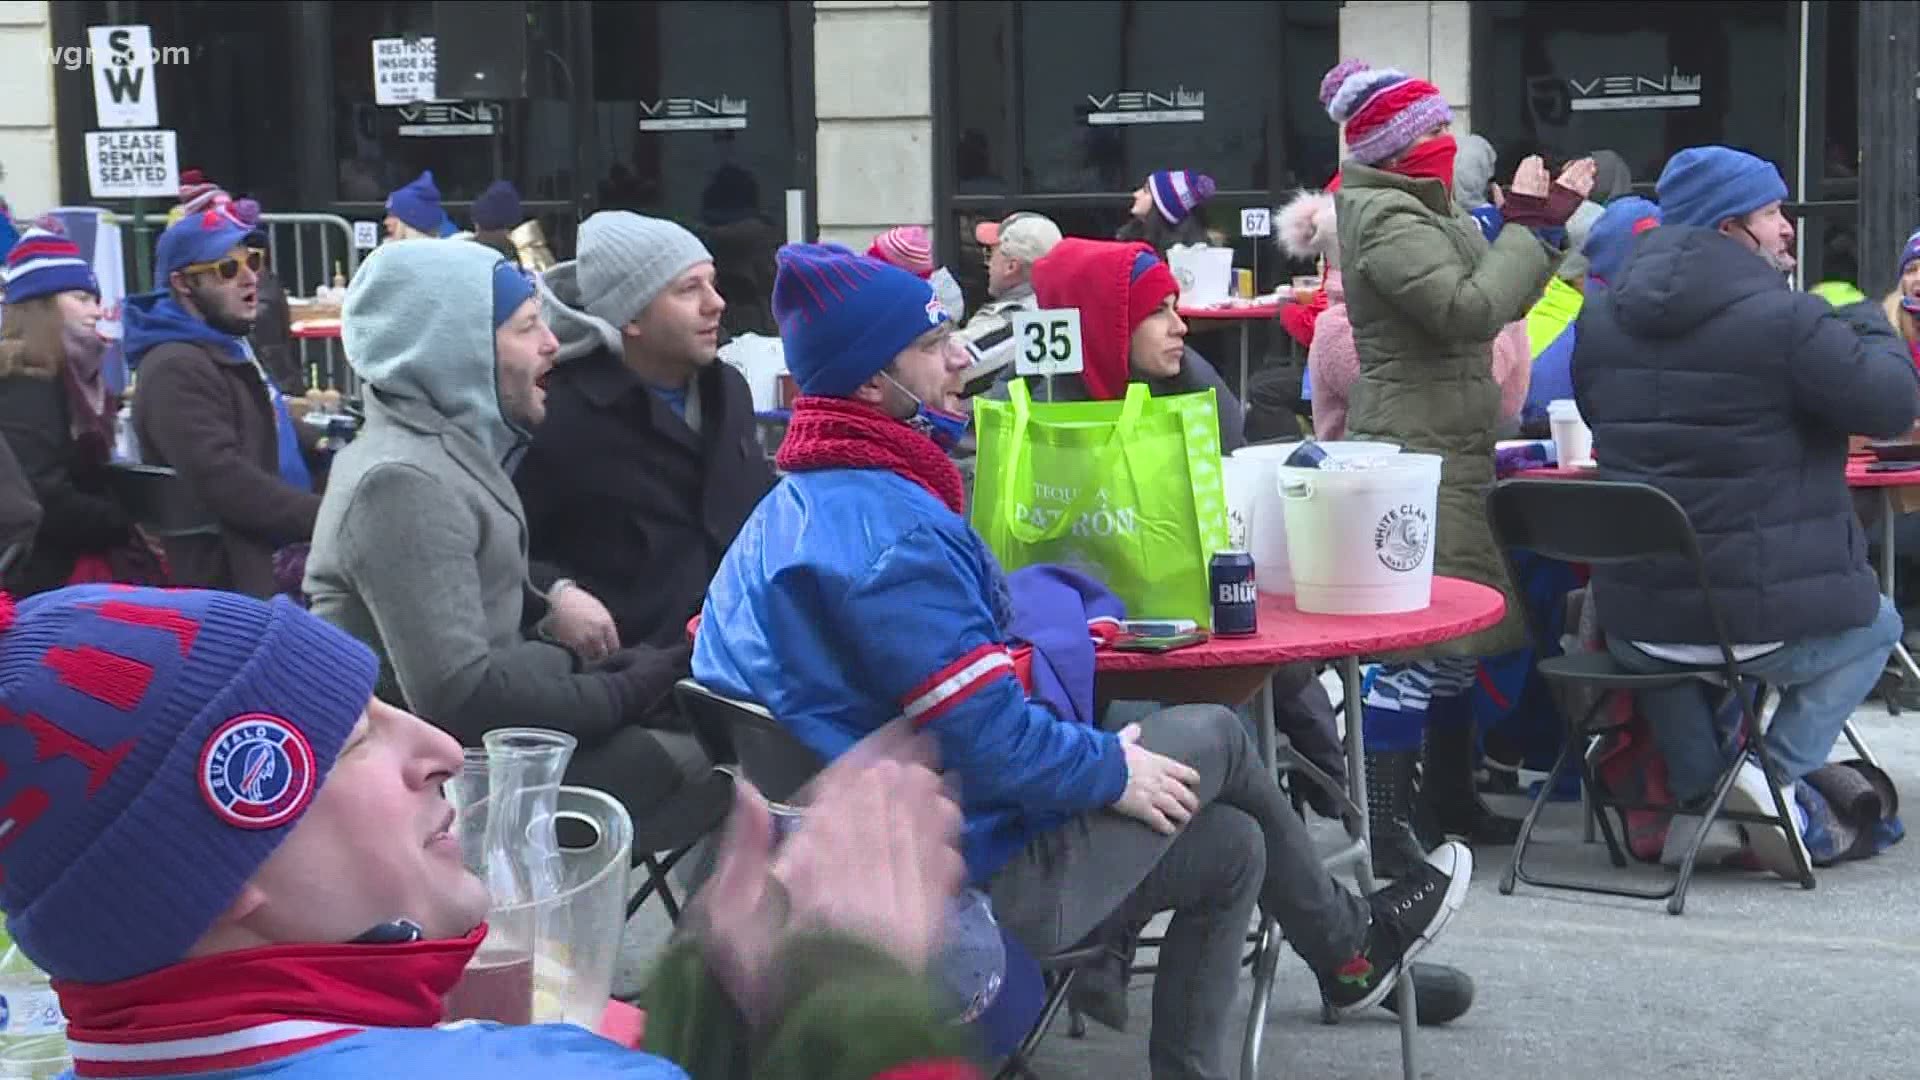 Many local restaurants are planning safe outdoor viewing parties and Buffalo Mayor Byron brown is among the people involved in discussions about a possible change.